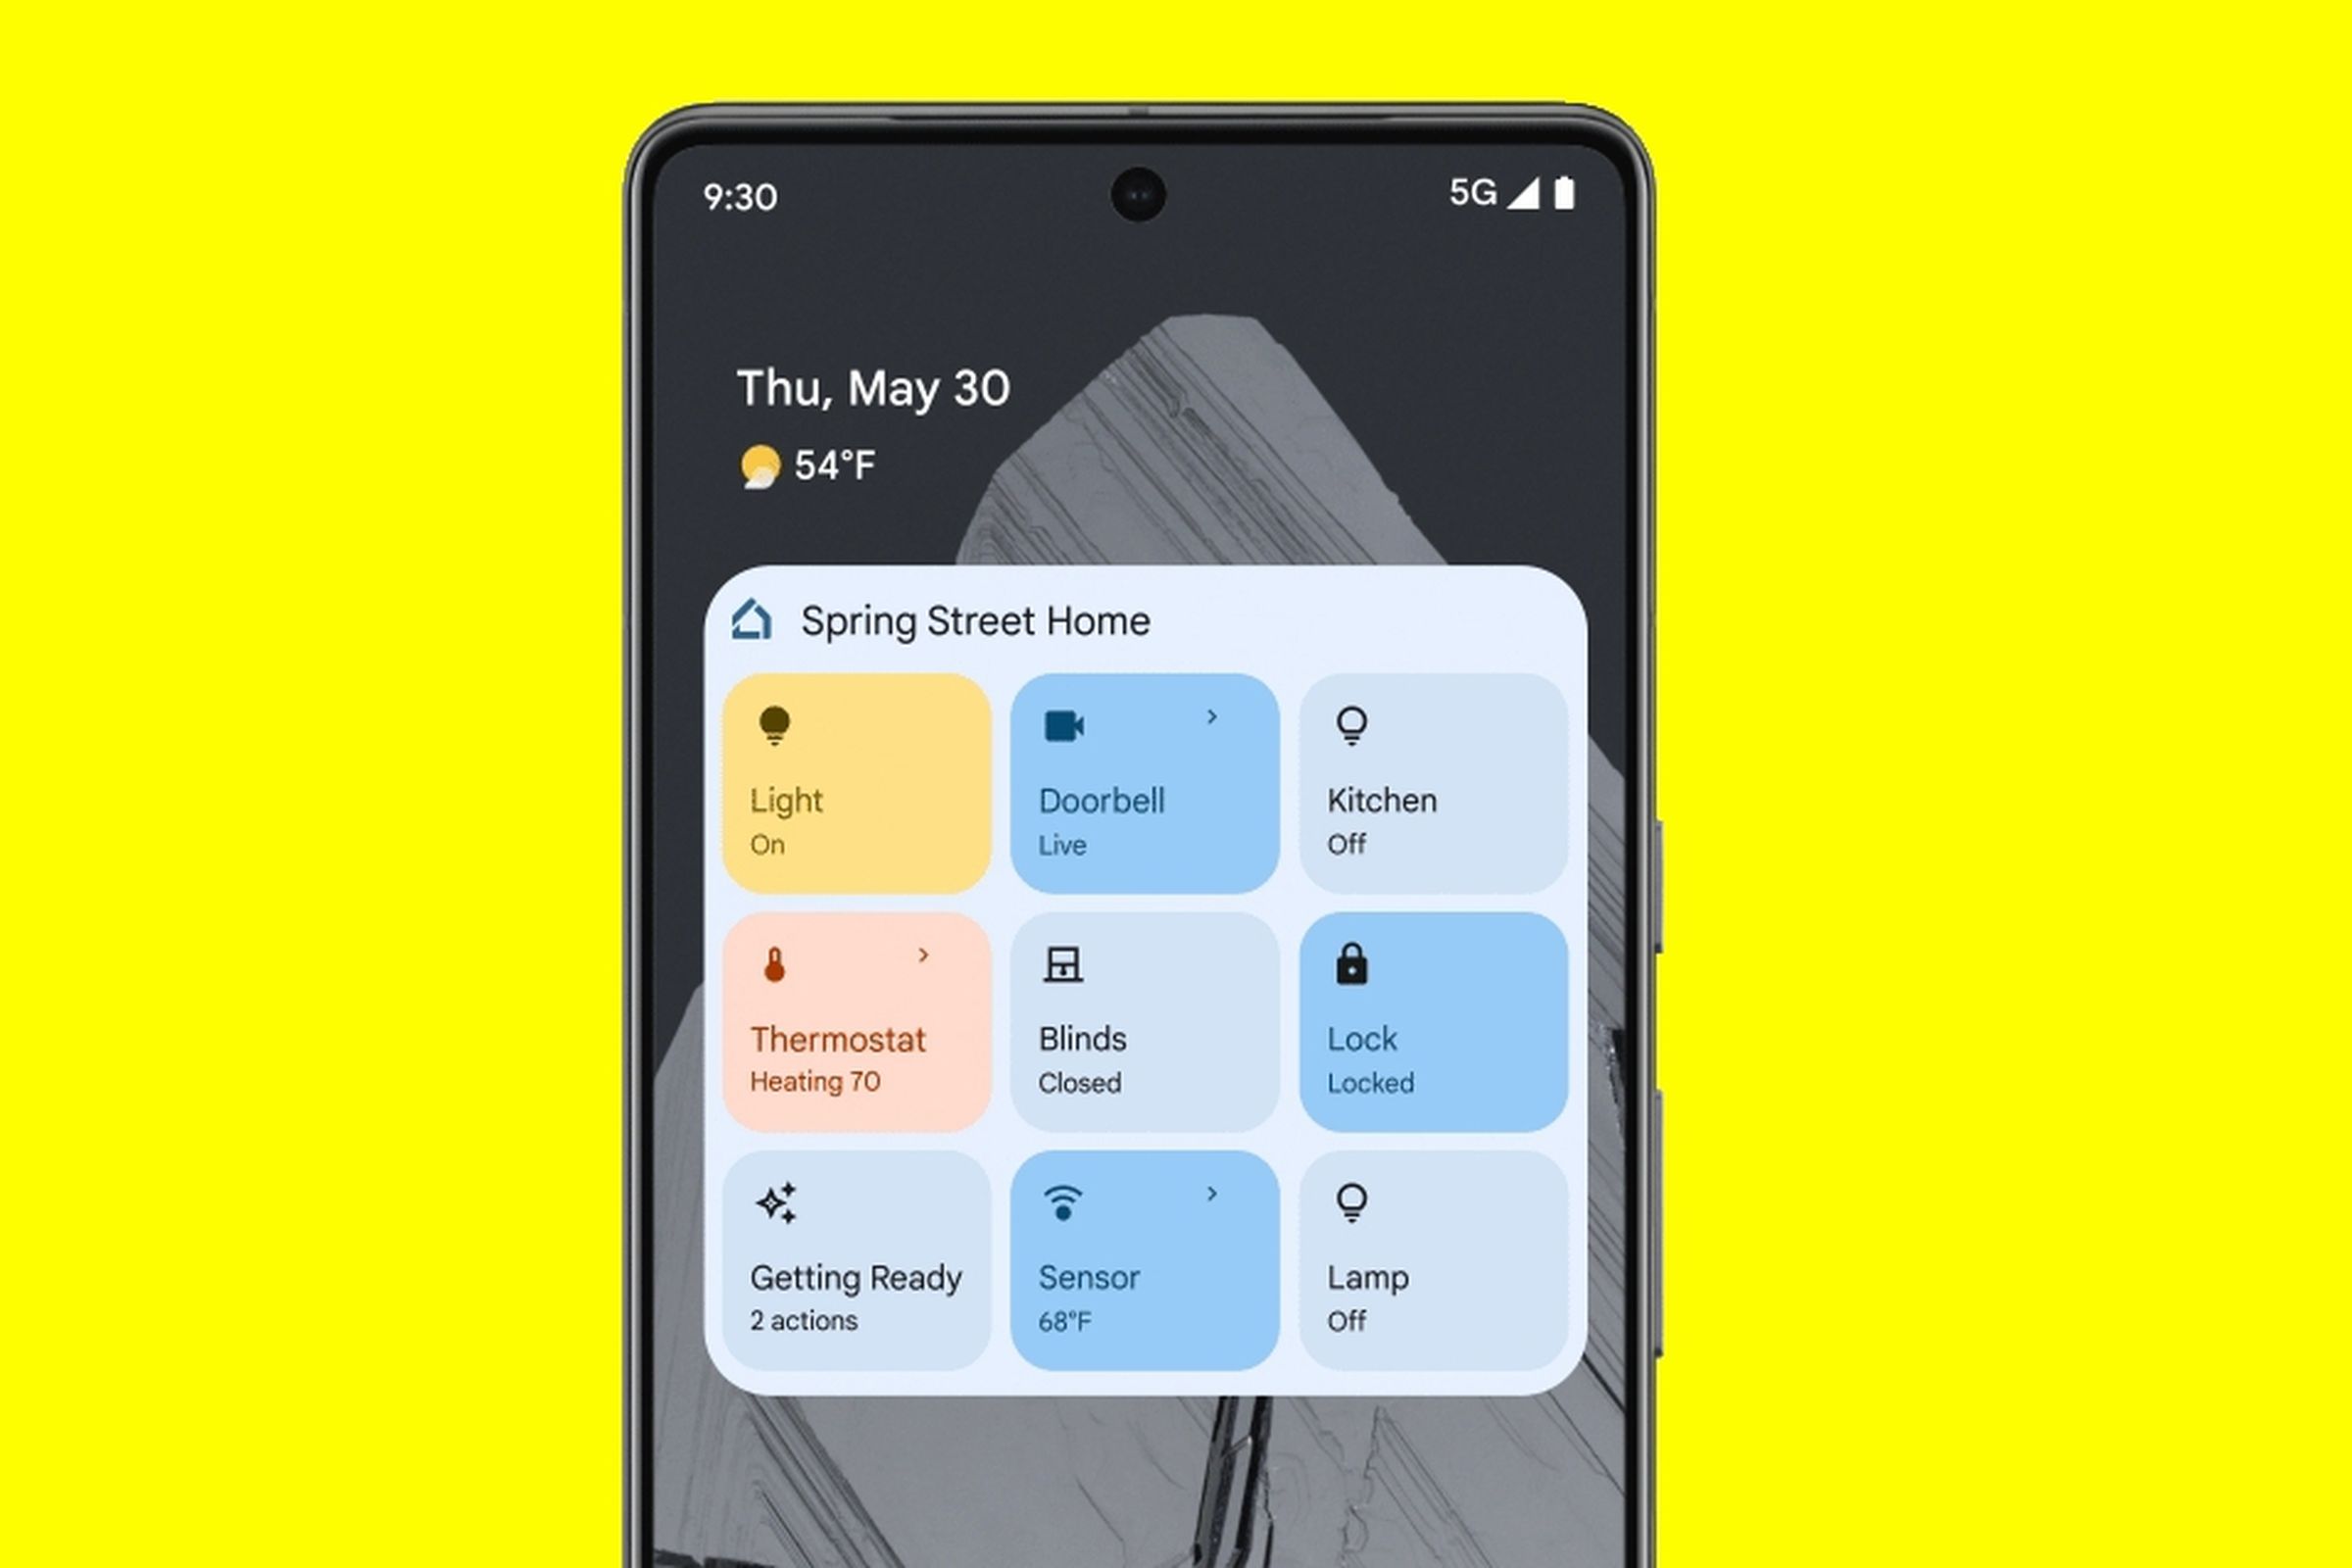 A new interactive Google Home widget is coming to Android.